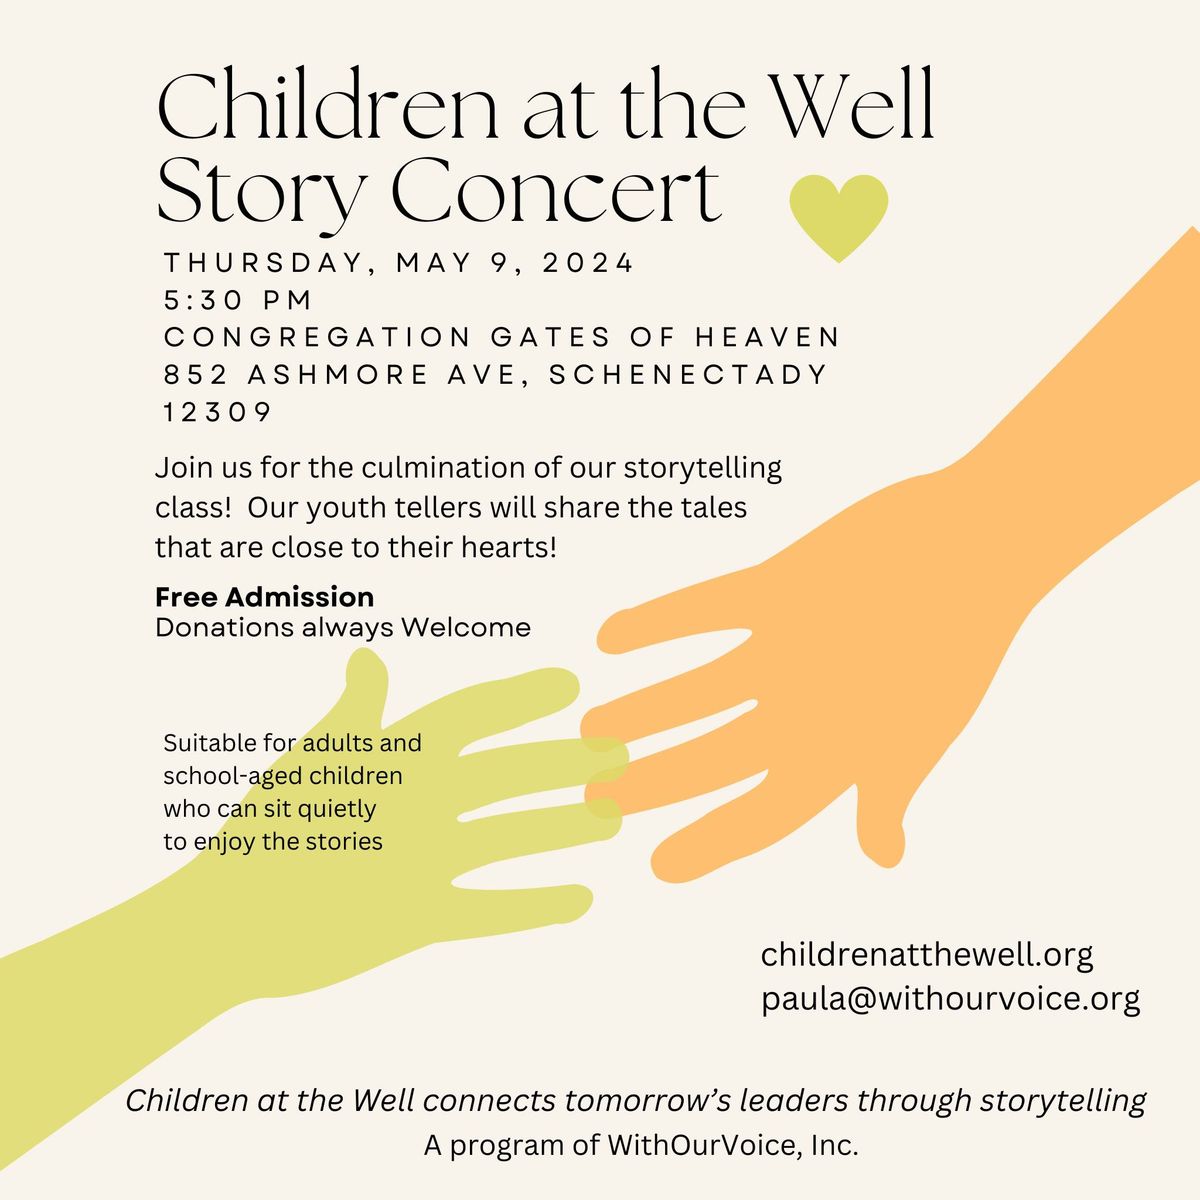 Children at the Well Story Concert